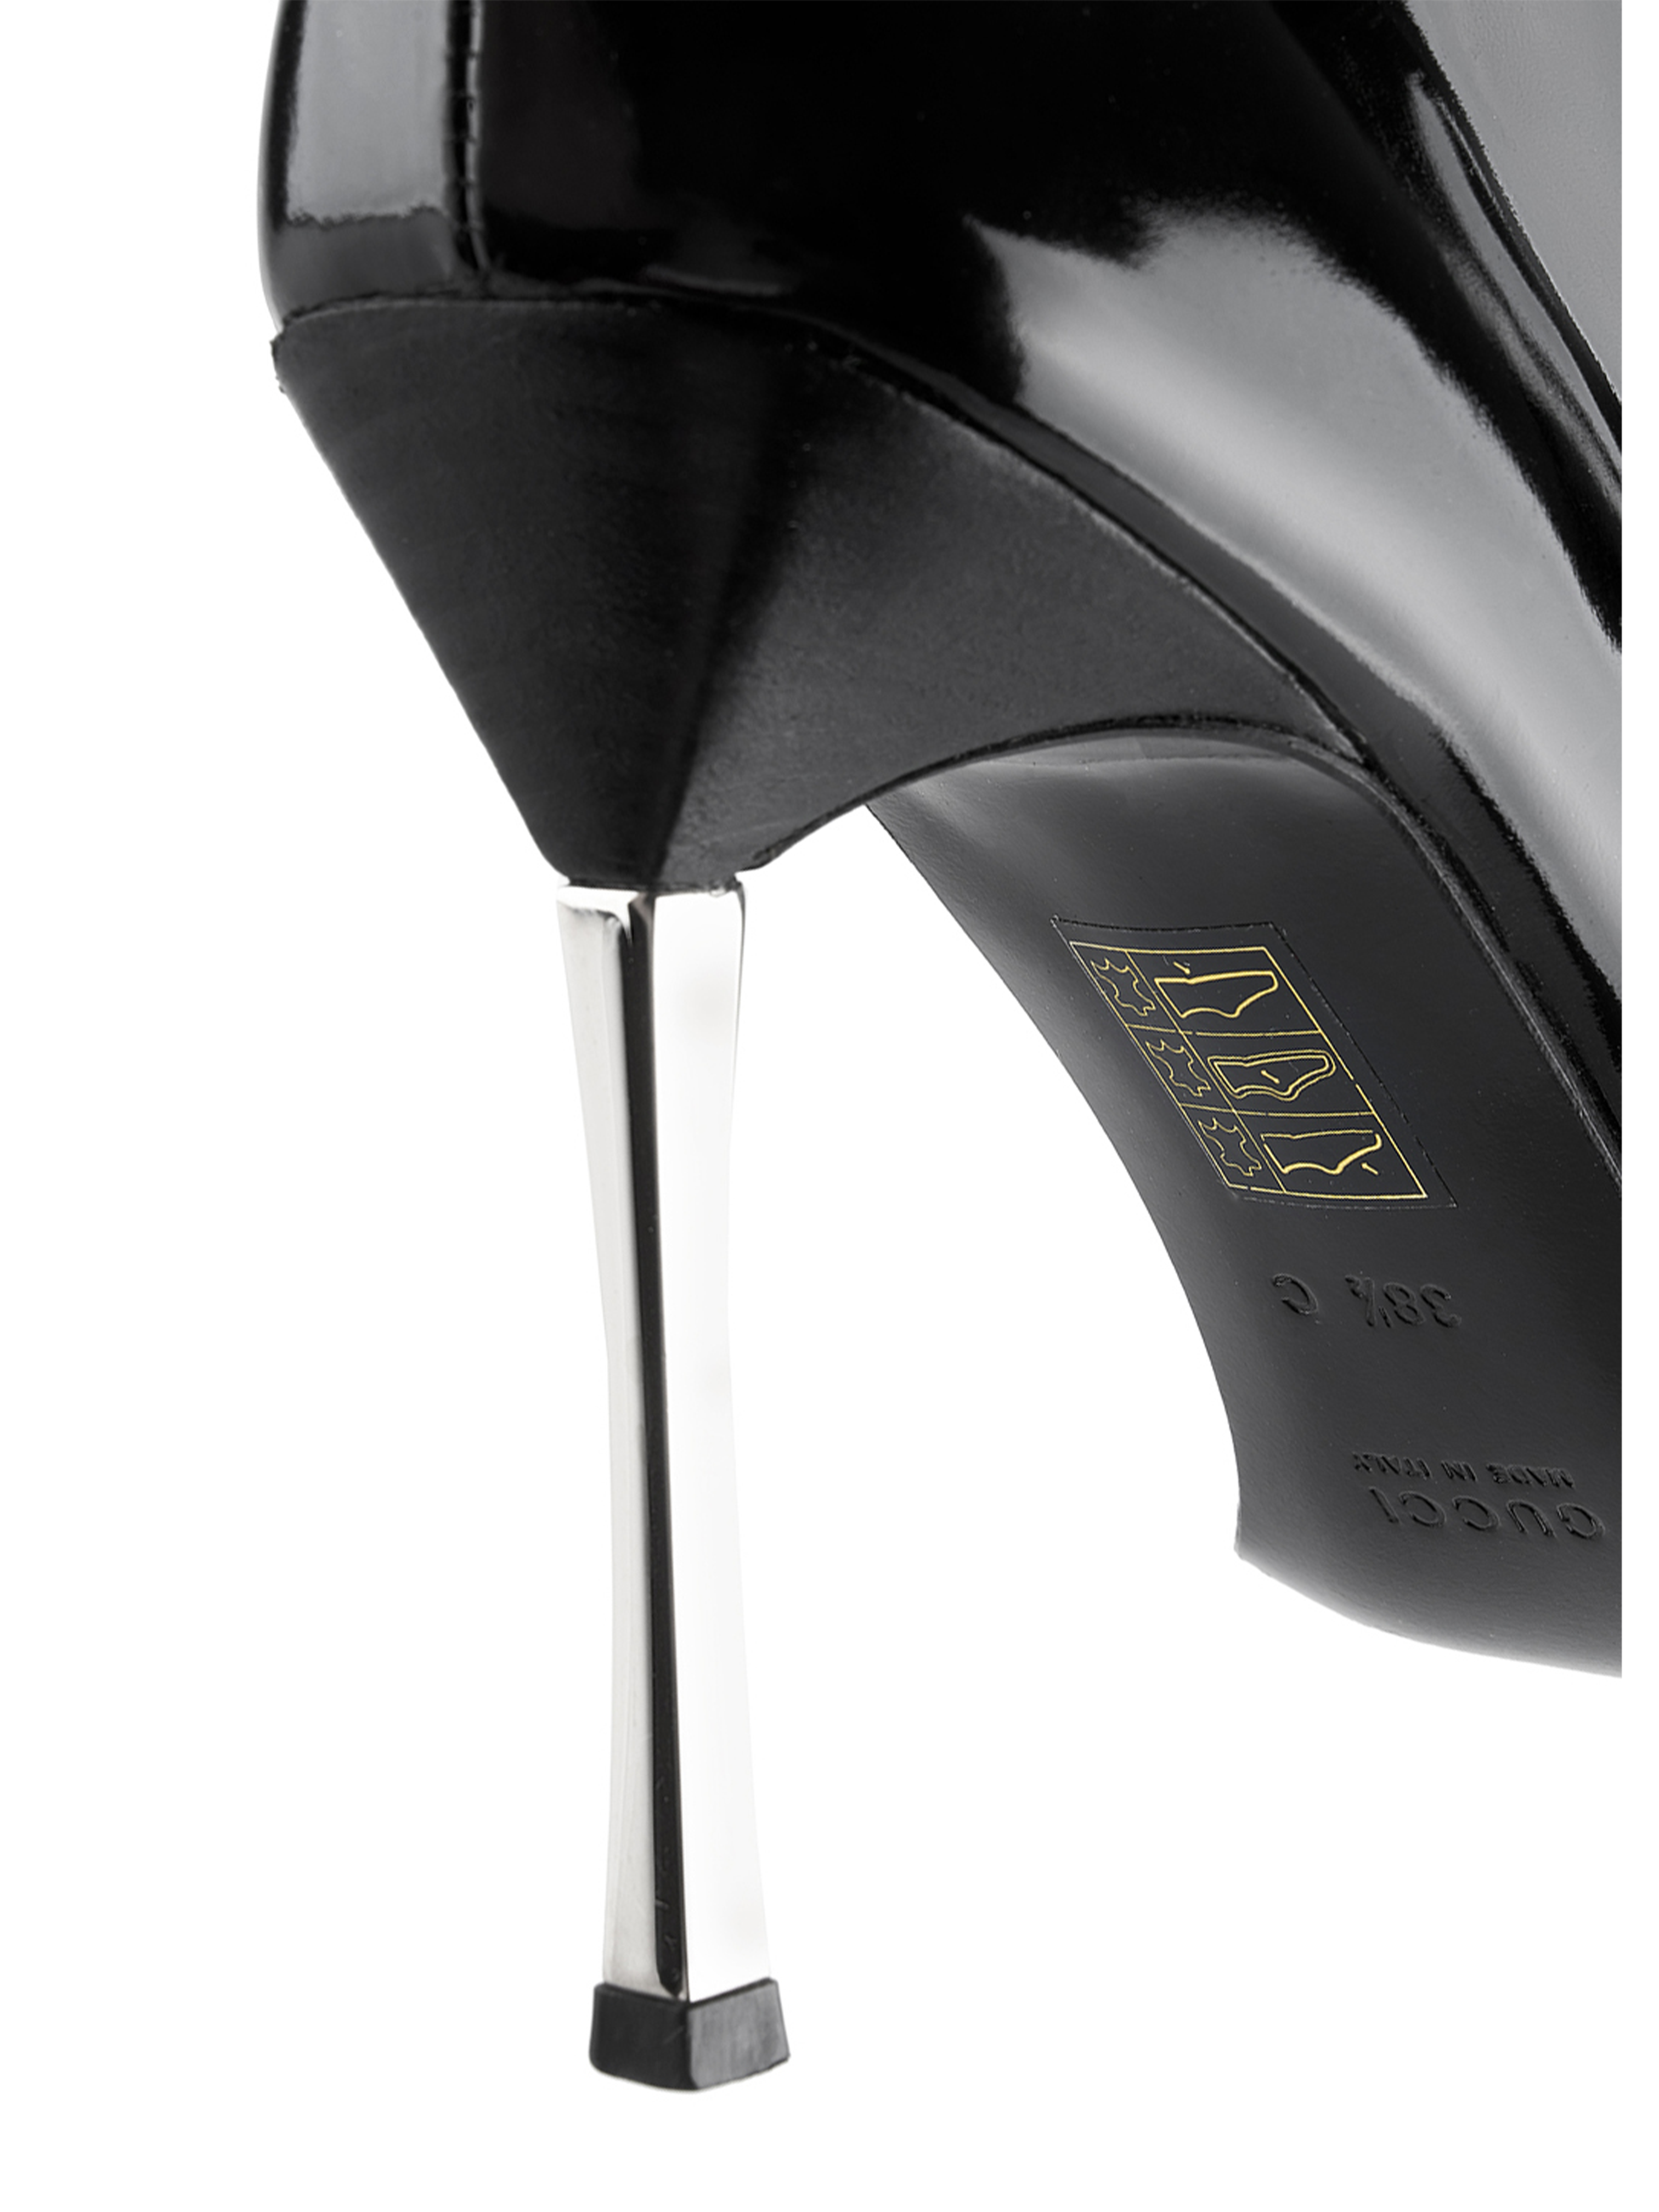 Gucci by Tom Ford Fall-Winter 1997 Black Patent Leather Boots · INTO